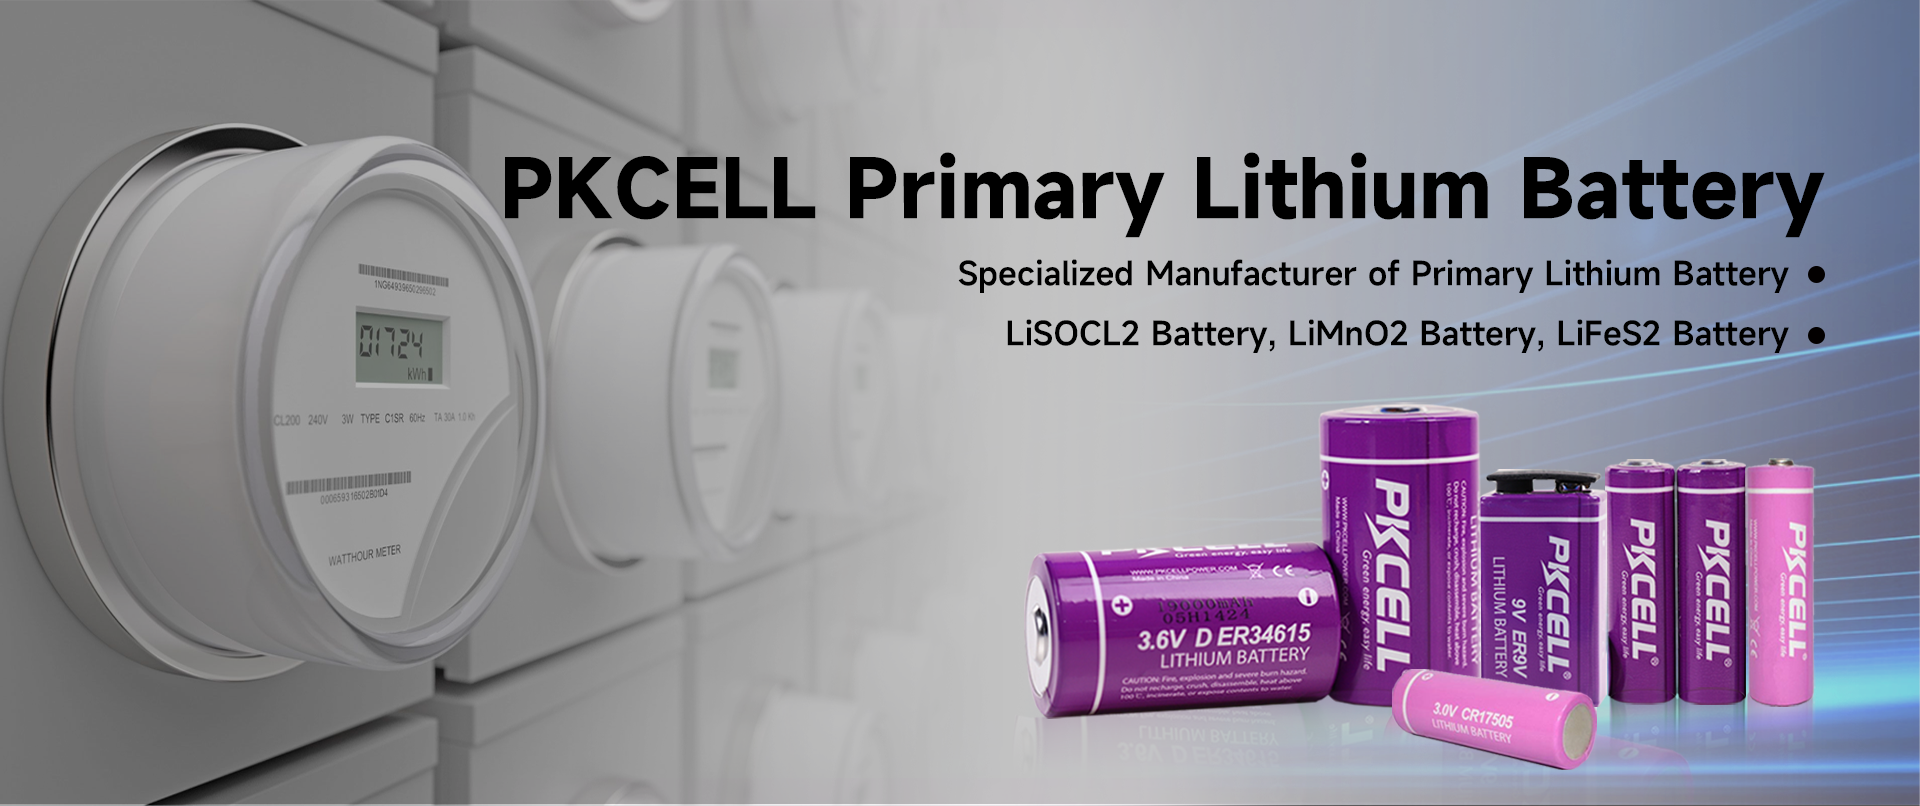 Specialized Manufacturer of Primary Lithium Battery